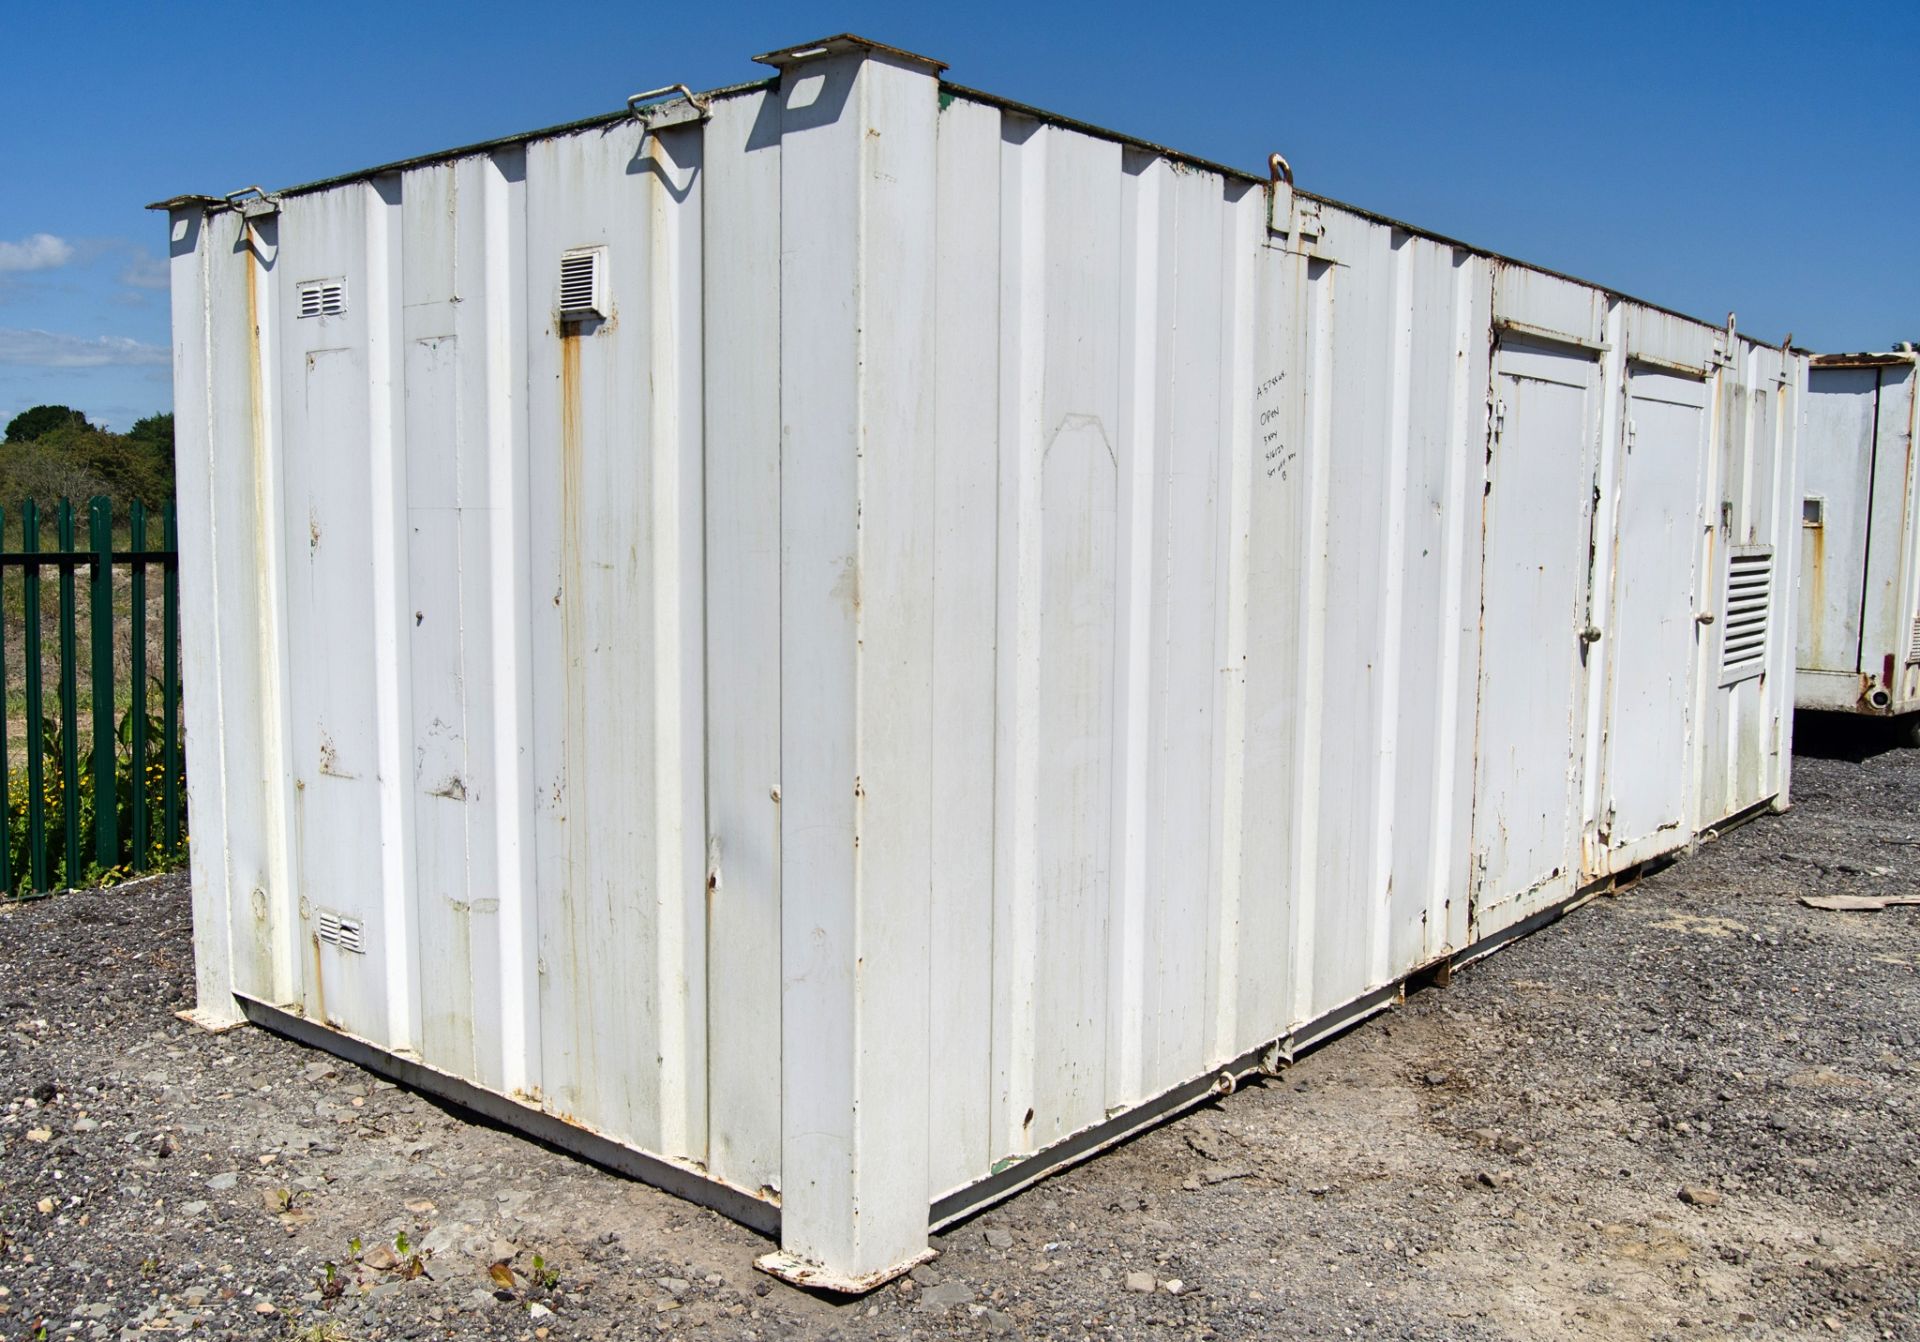 24ft x 9 ft steel anti-vandal welfare site unit Comprising of: canteen area, changing area, - Image 2 of 12